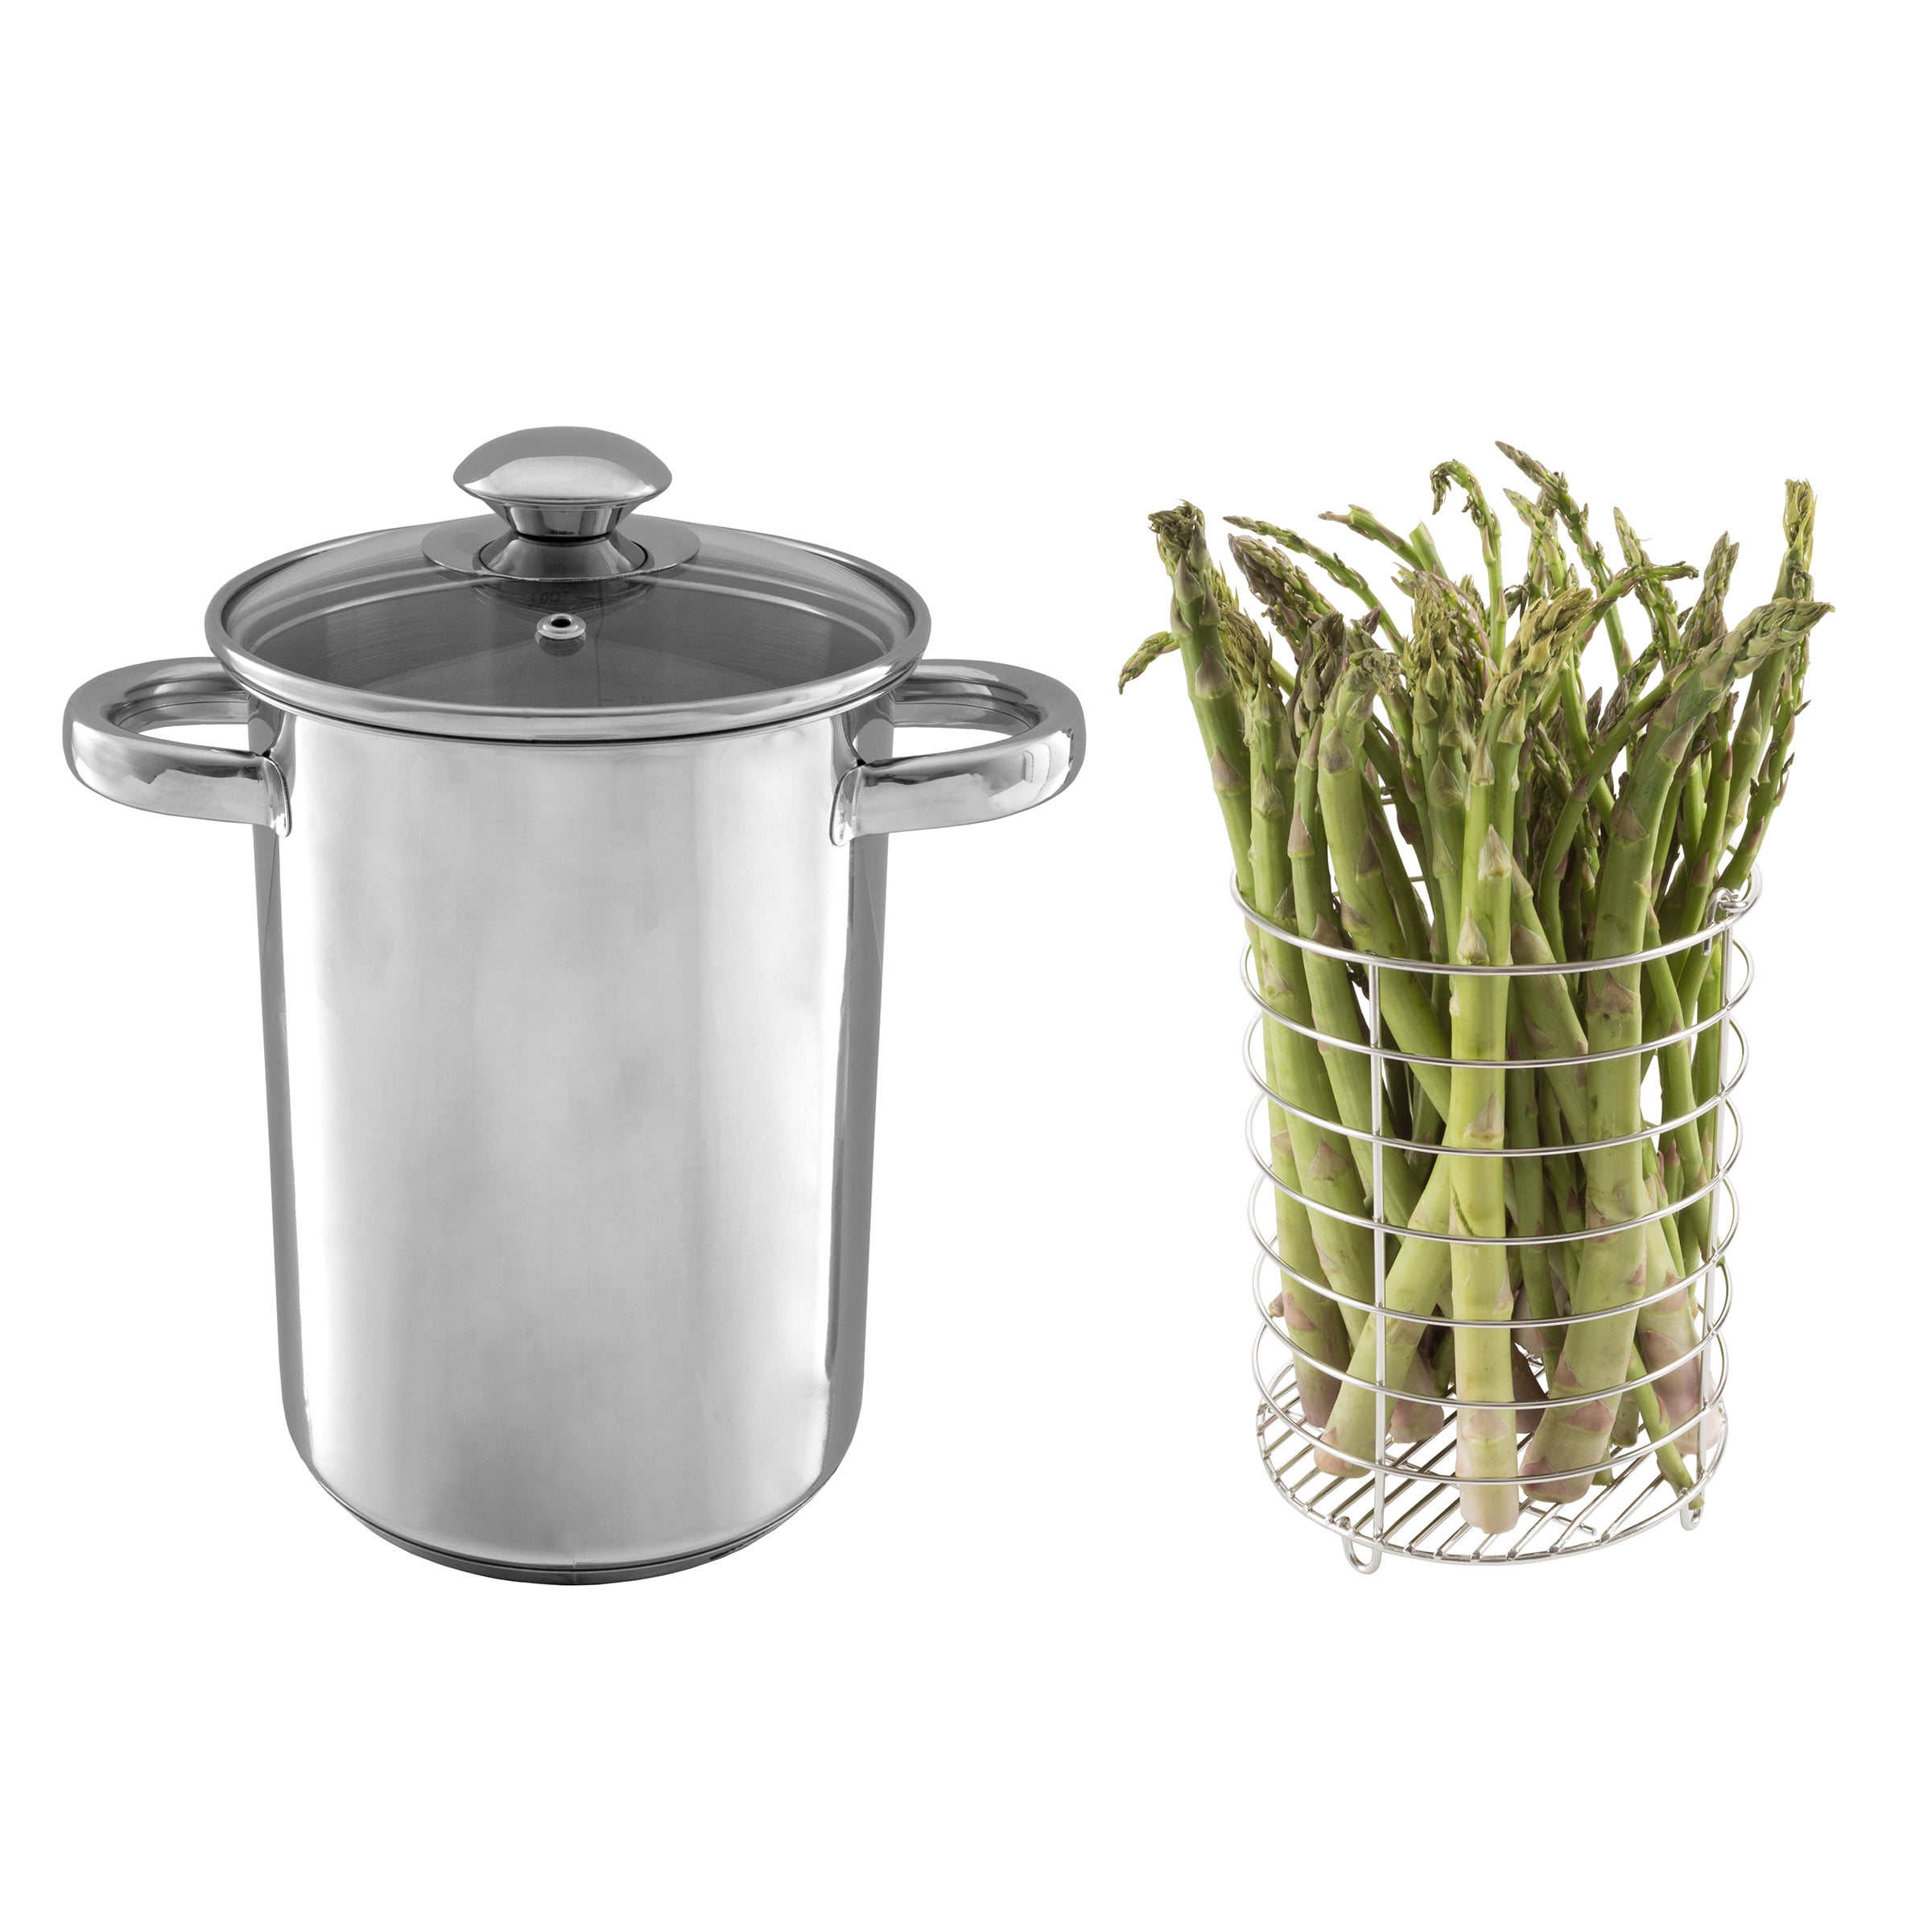 Asparagus Pot Stainless Steel Steamer Cooker with Basket and Lid Pasta 16cm  4L